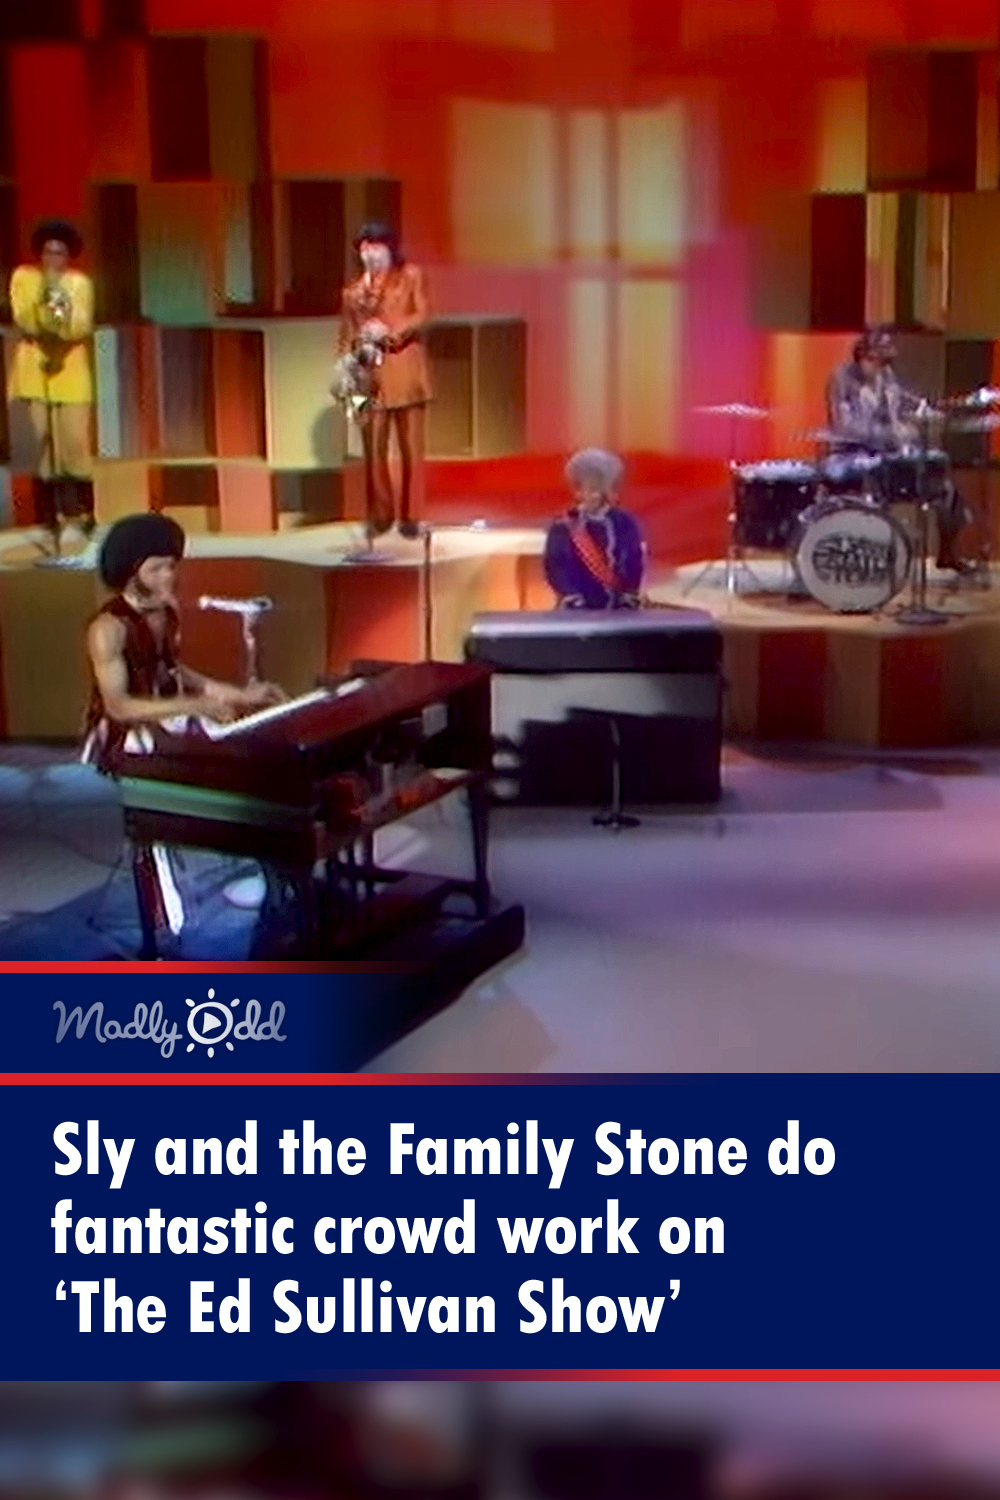 Sly and the Family Stone do fantastic crowd work on ‘The Ed Sullivan Show’